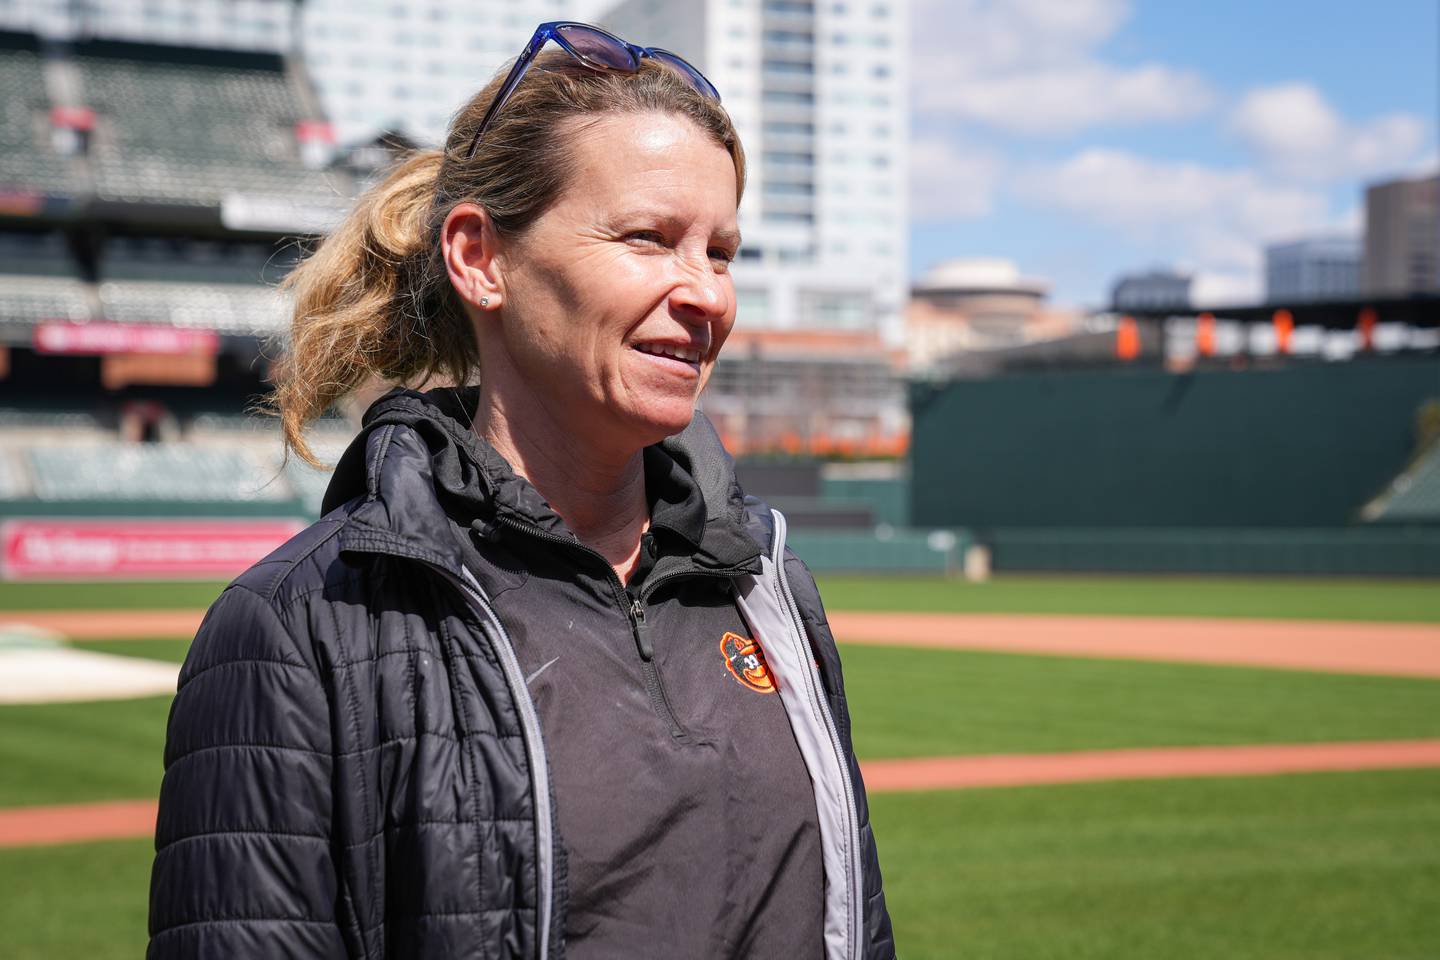 Orioles groundskeeper Nicole Sherry answers questions from reporters during a media preview in Oriole Park at Camden Yards on Wednesday, March 29. For the first time in 23 years, Oriole Park has brand-new turf.